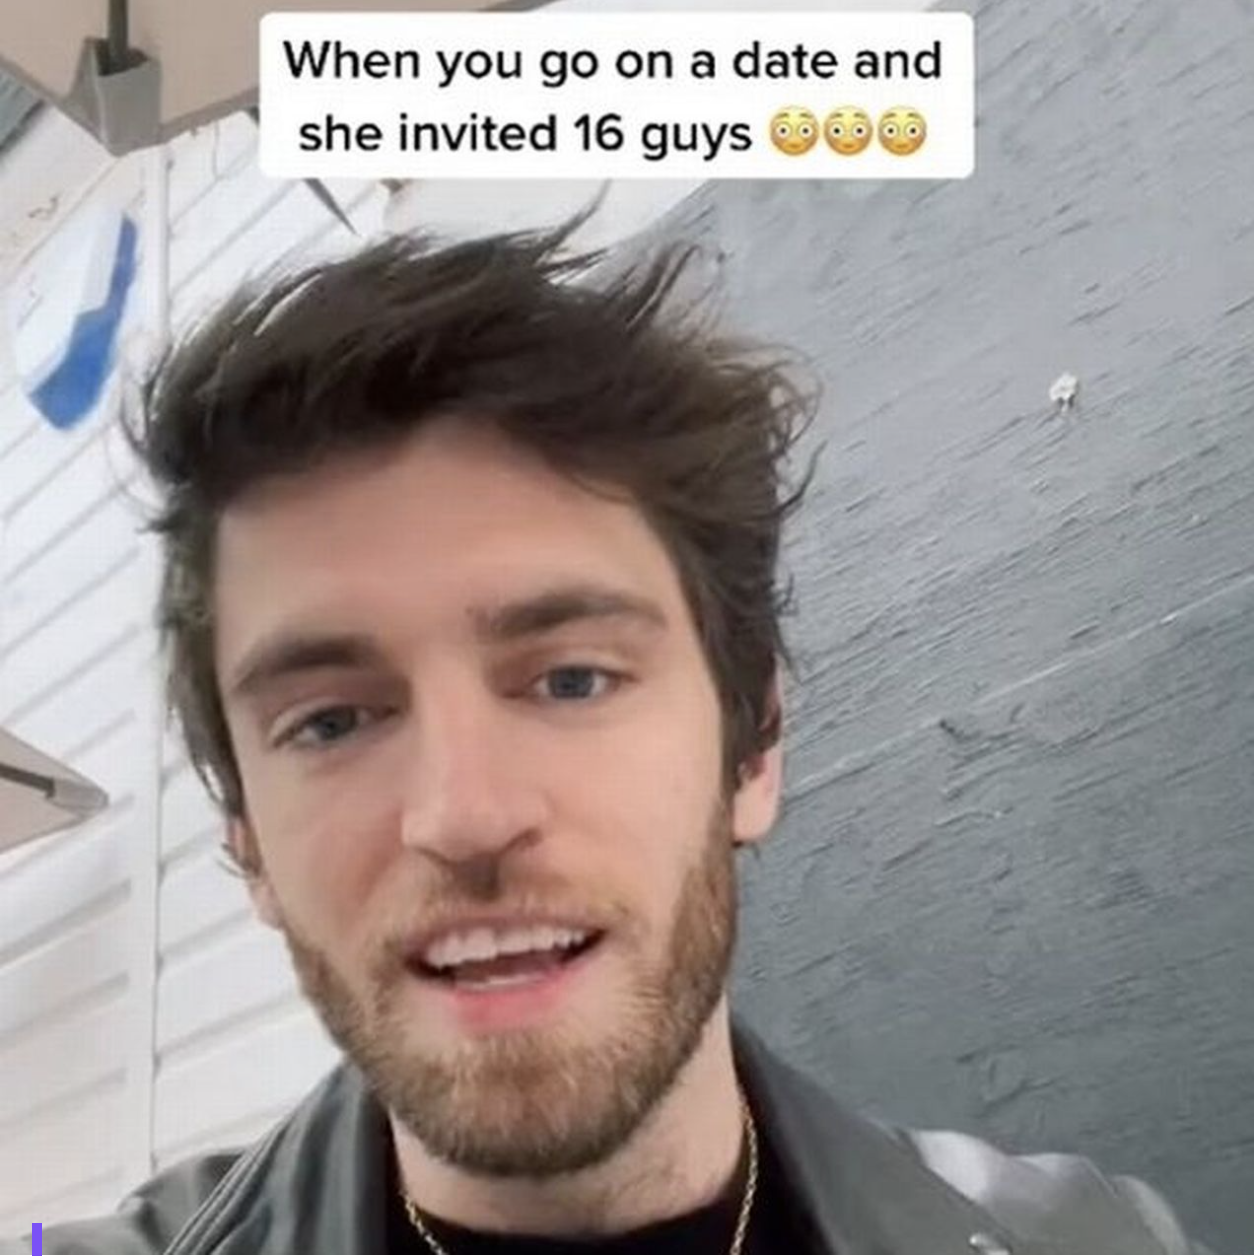 HIGHLIGHT - We Speak To One Of The 17 Guys Who Showed Up To The Same Tinder Date At The Same Time